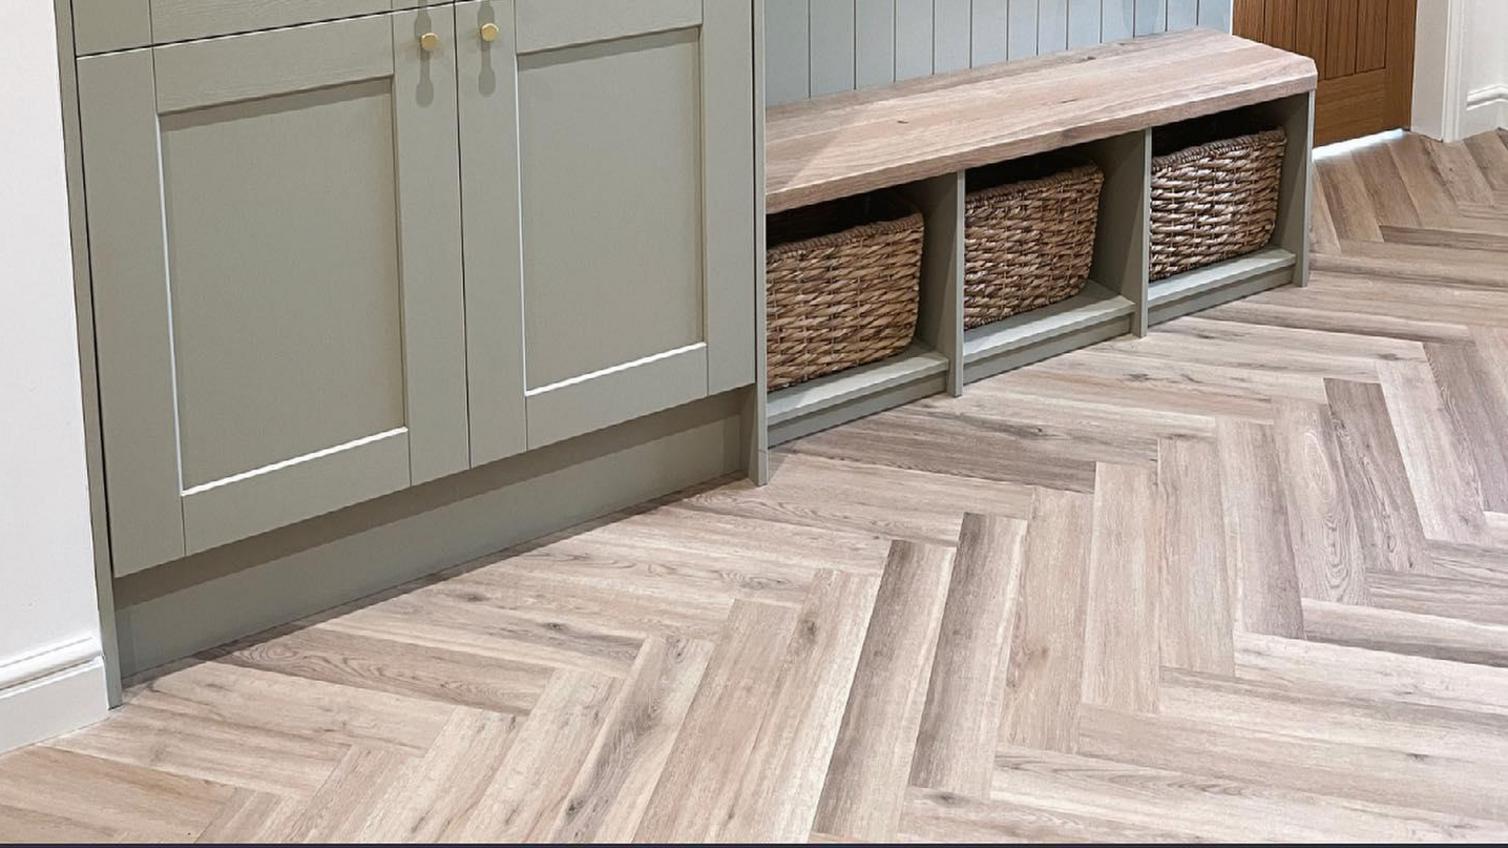 Small boot room idea featuring green, tower units, herringbone flooring, and wall panelling for a classic look.